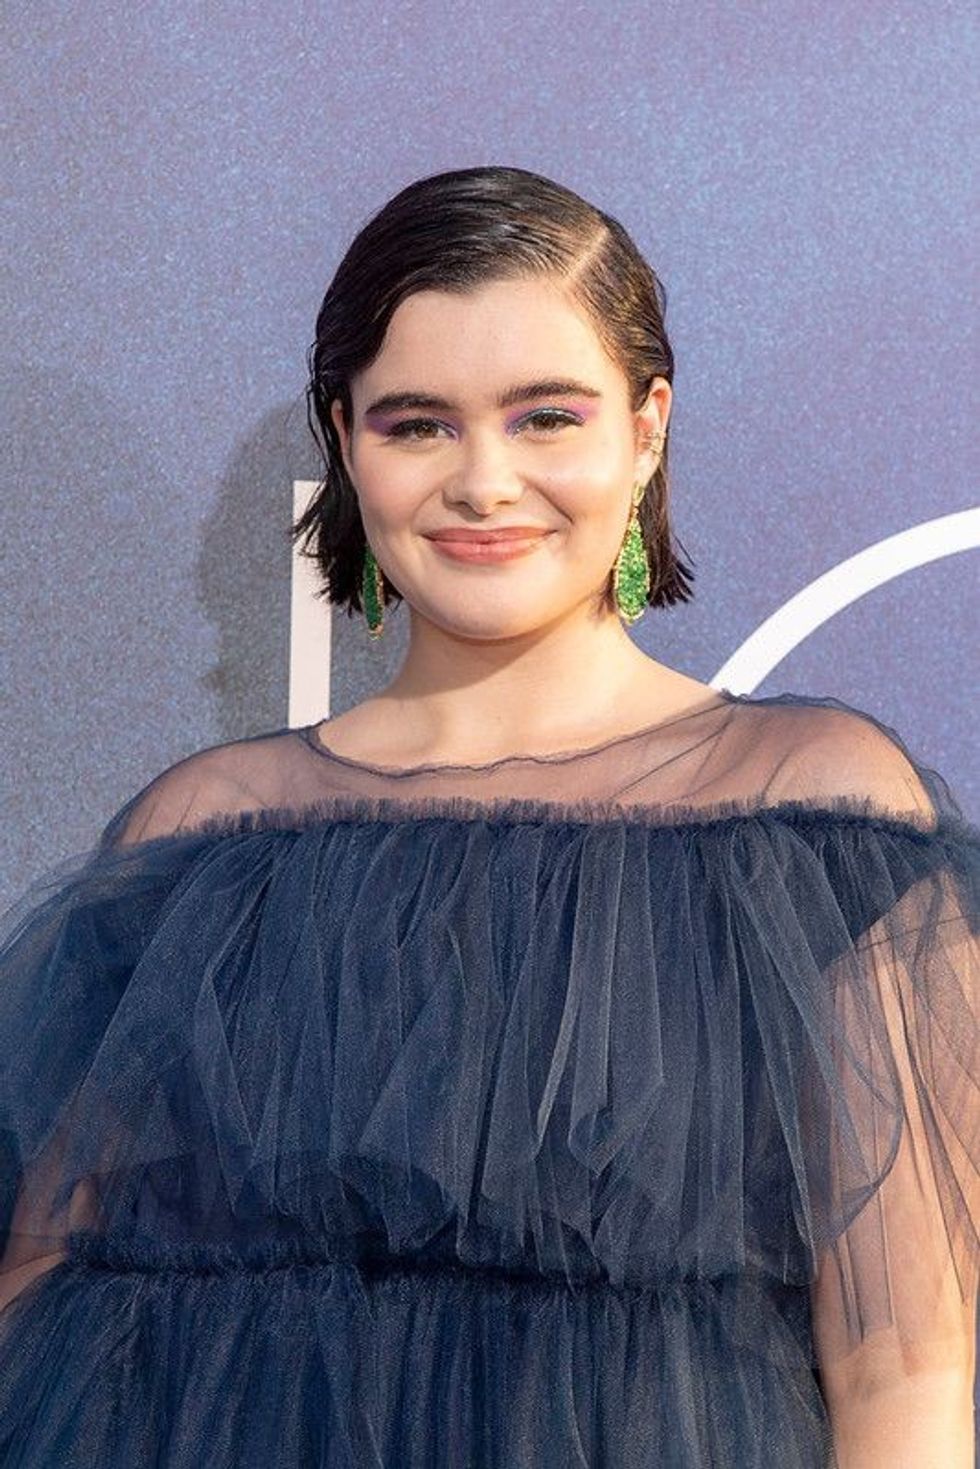 Barbie Ferreira recently featured in 'Cosmopolitan' magazine and then shared the post on her Instagram account. Barbie Ferreira is best known for her work on the television series 'Euphoria'.